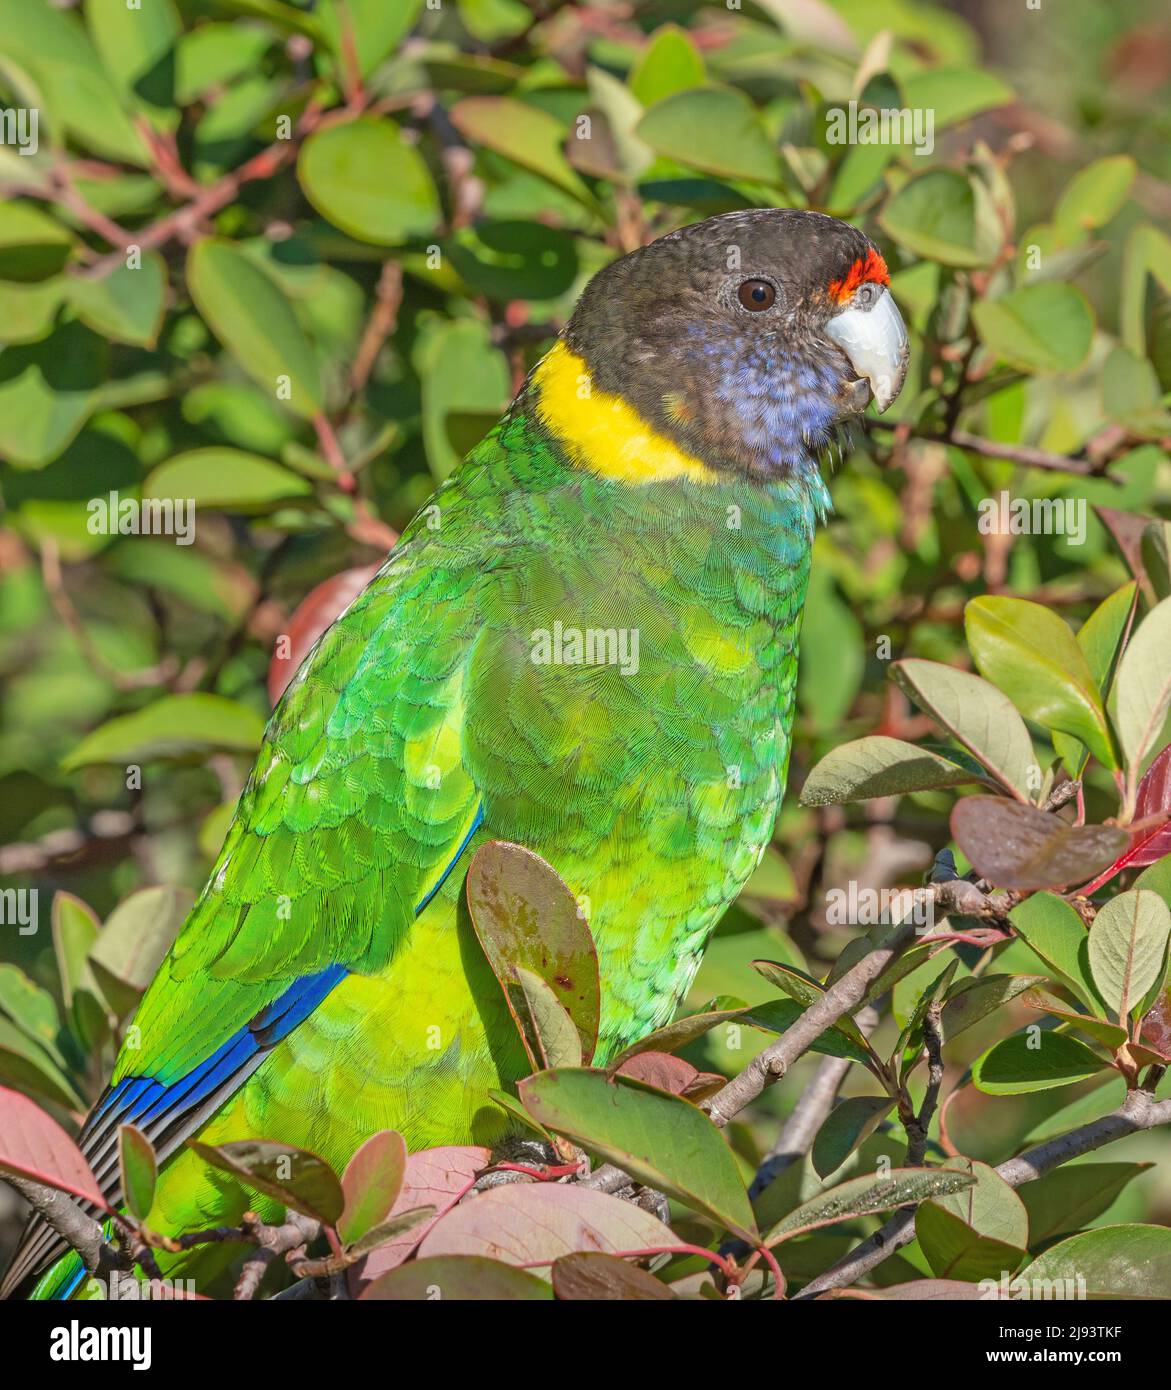 A portrait of an Australian Ringneck Parrot of the western race, also known as the Twenty-eight Parrot, photographed in South Western Australia. Stock Photo